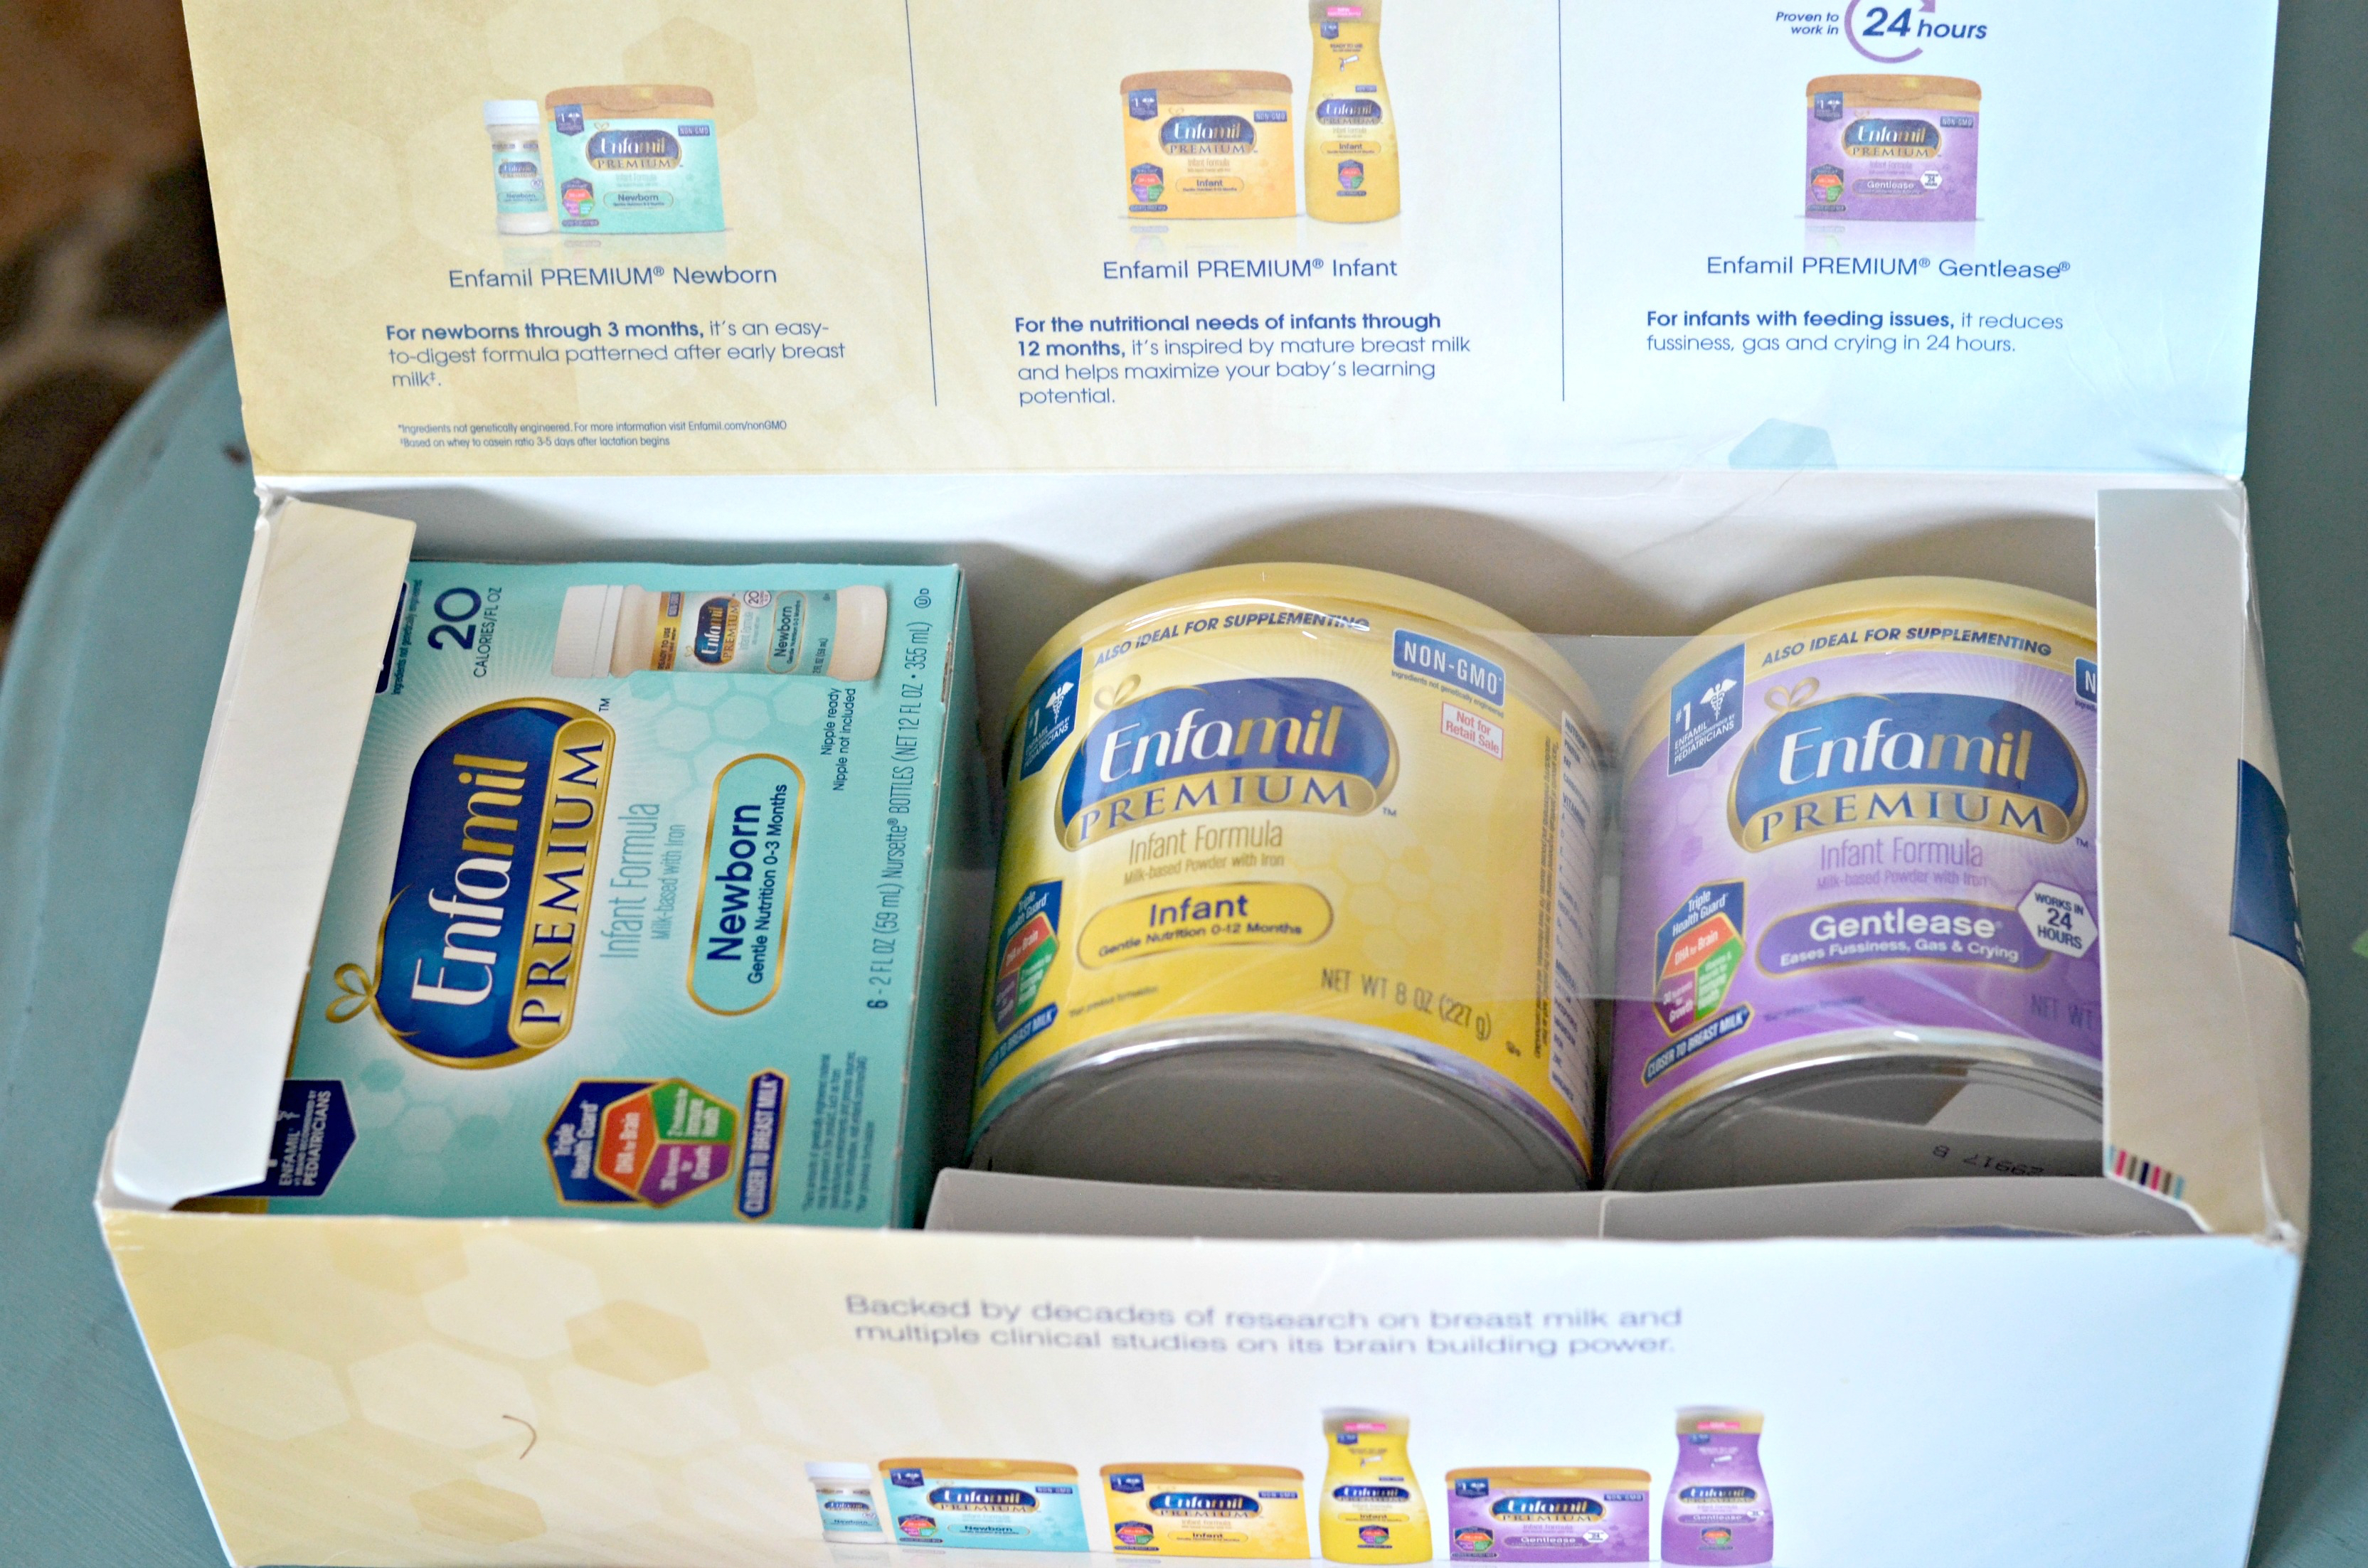 Request FREE Enfamil Baby Box (Includes 